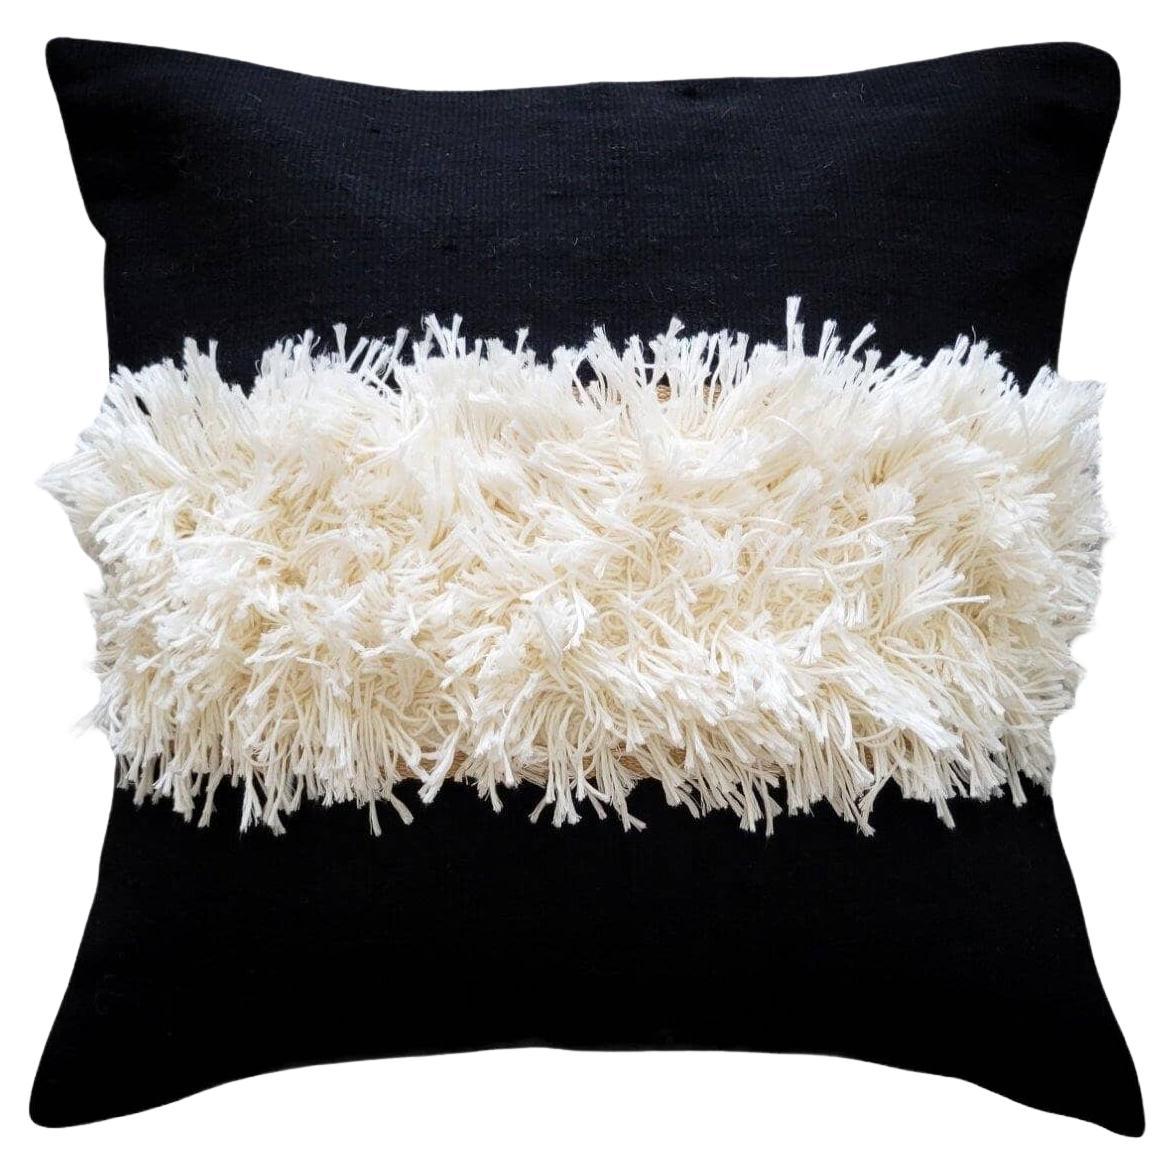 Riya Handwoven Cotton Decorative Throw Pillow Cover For Sale